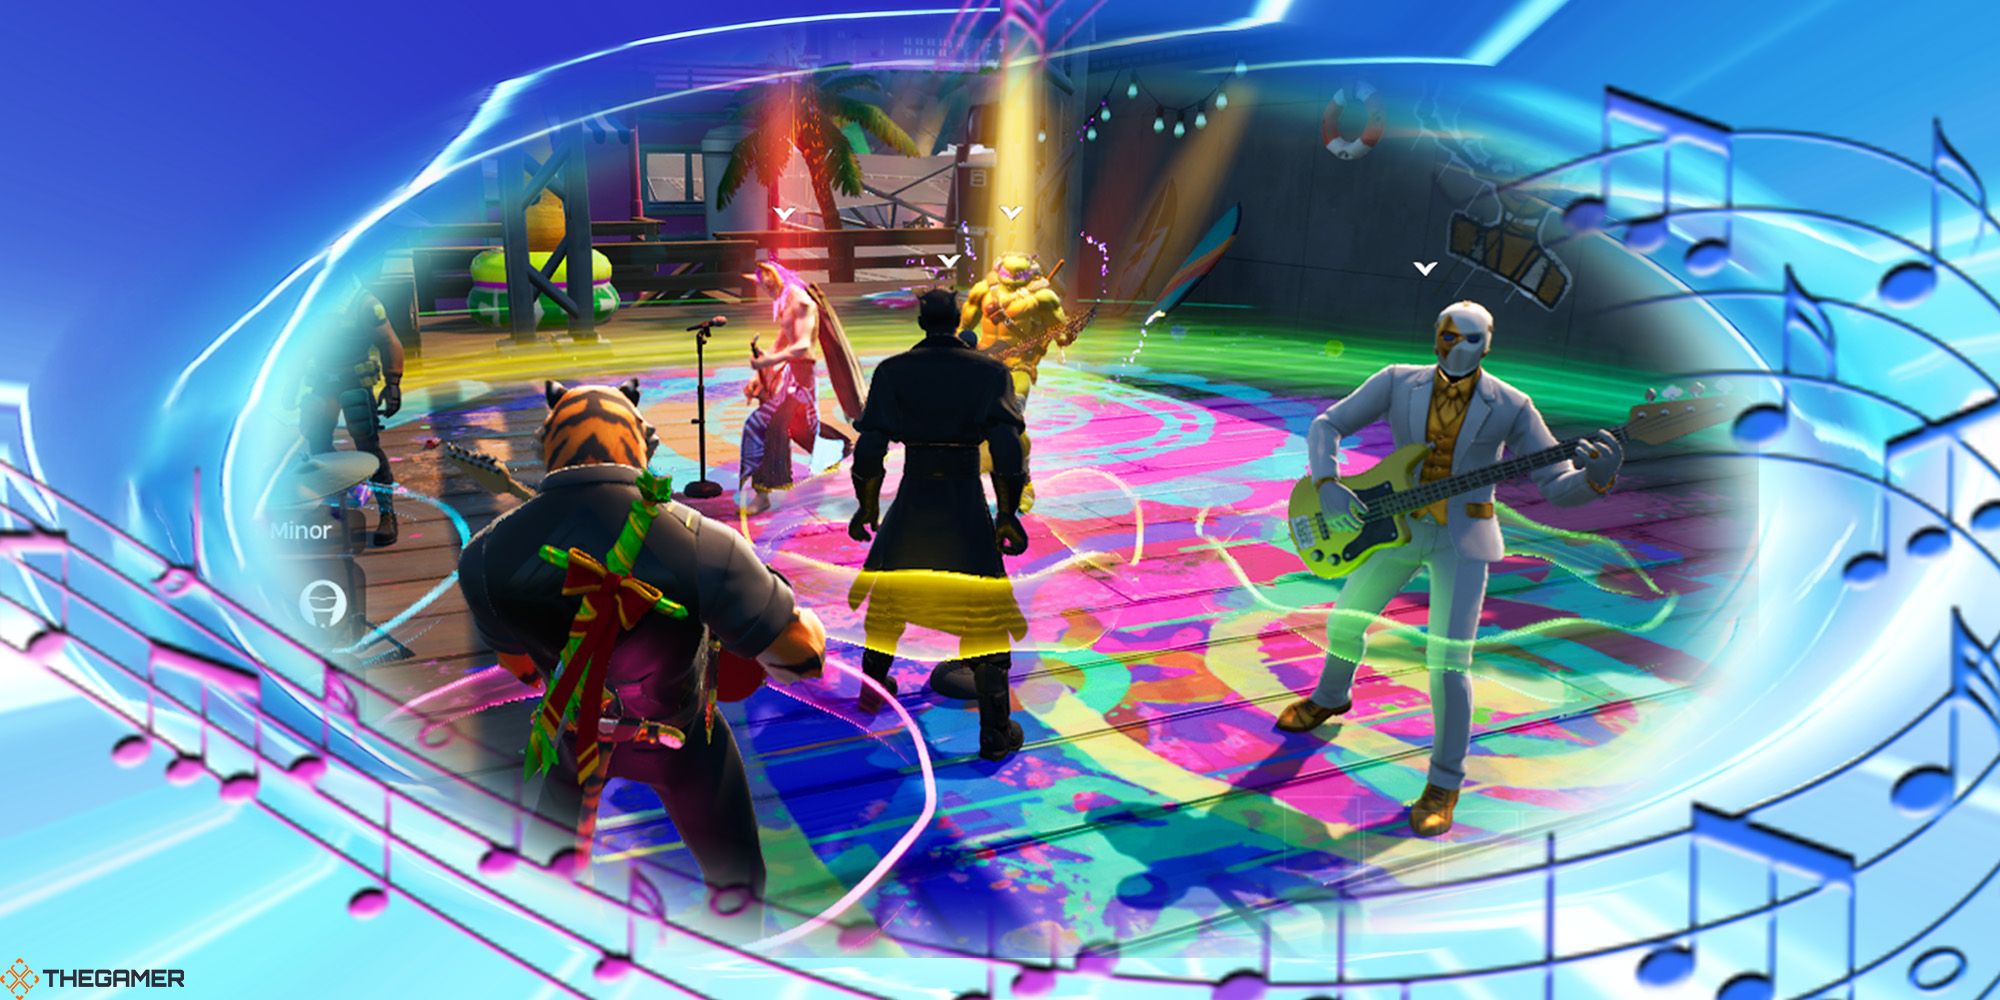 Oscar, Darth Maul, and others play music on a colorful stage in Fortnite Festival's Jam Stage mode. The screenshot is against a blue warped background with colorful music notes.